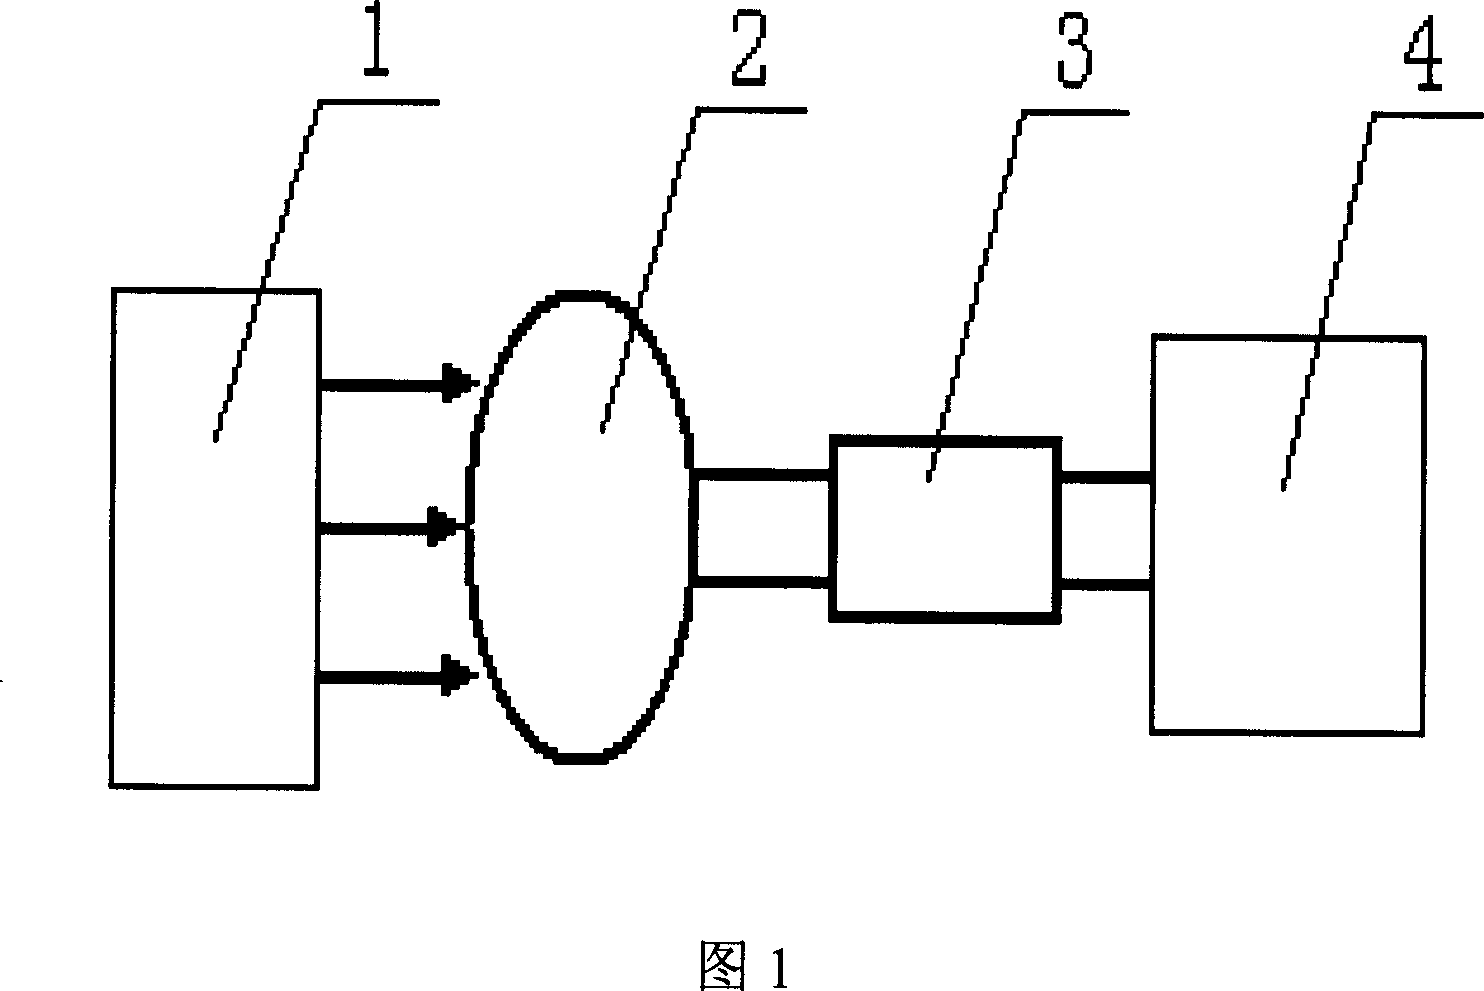 Electrical loading apparatus